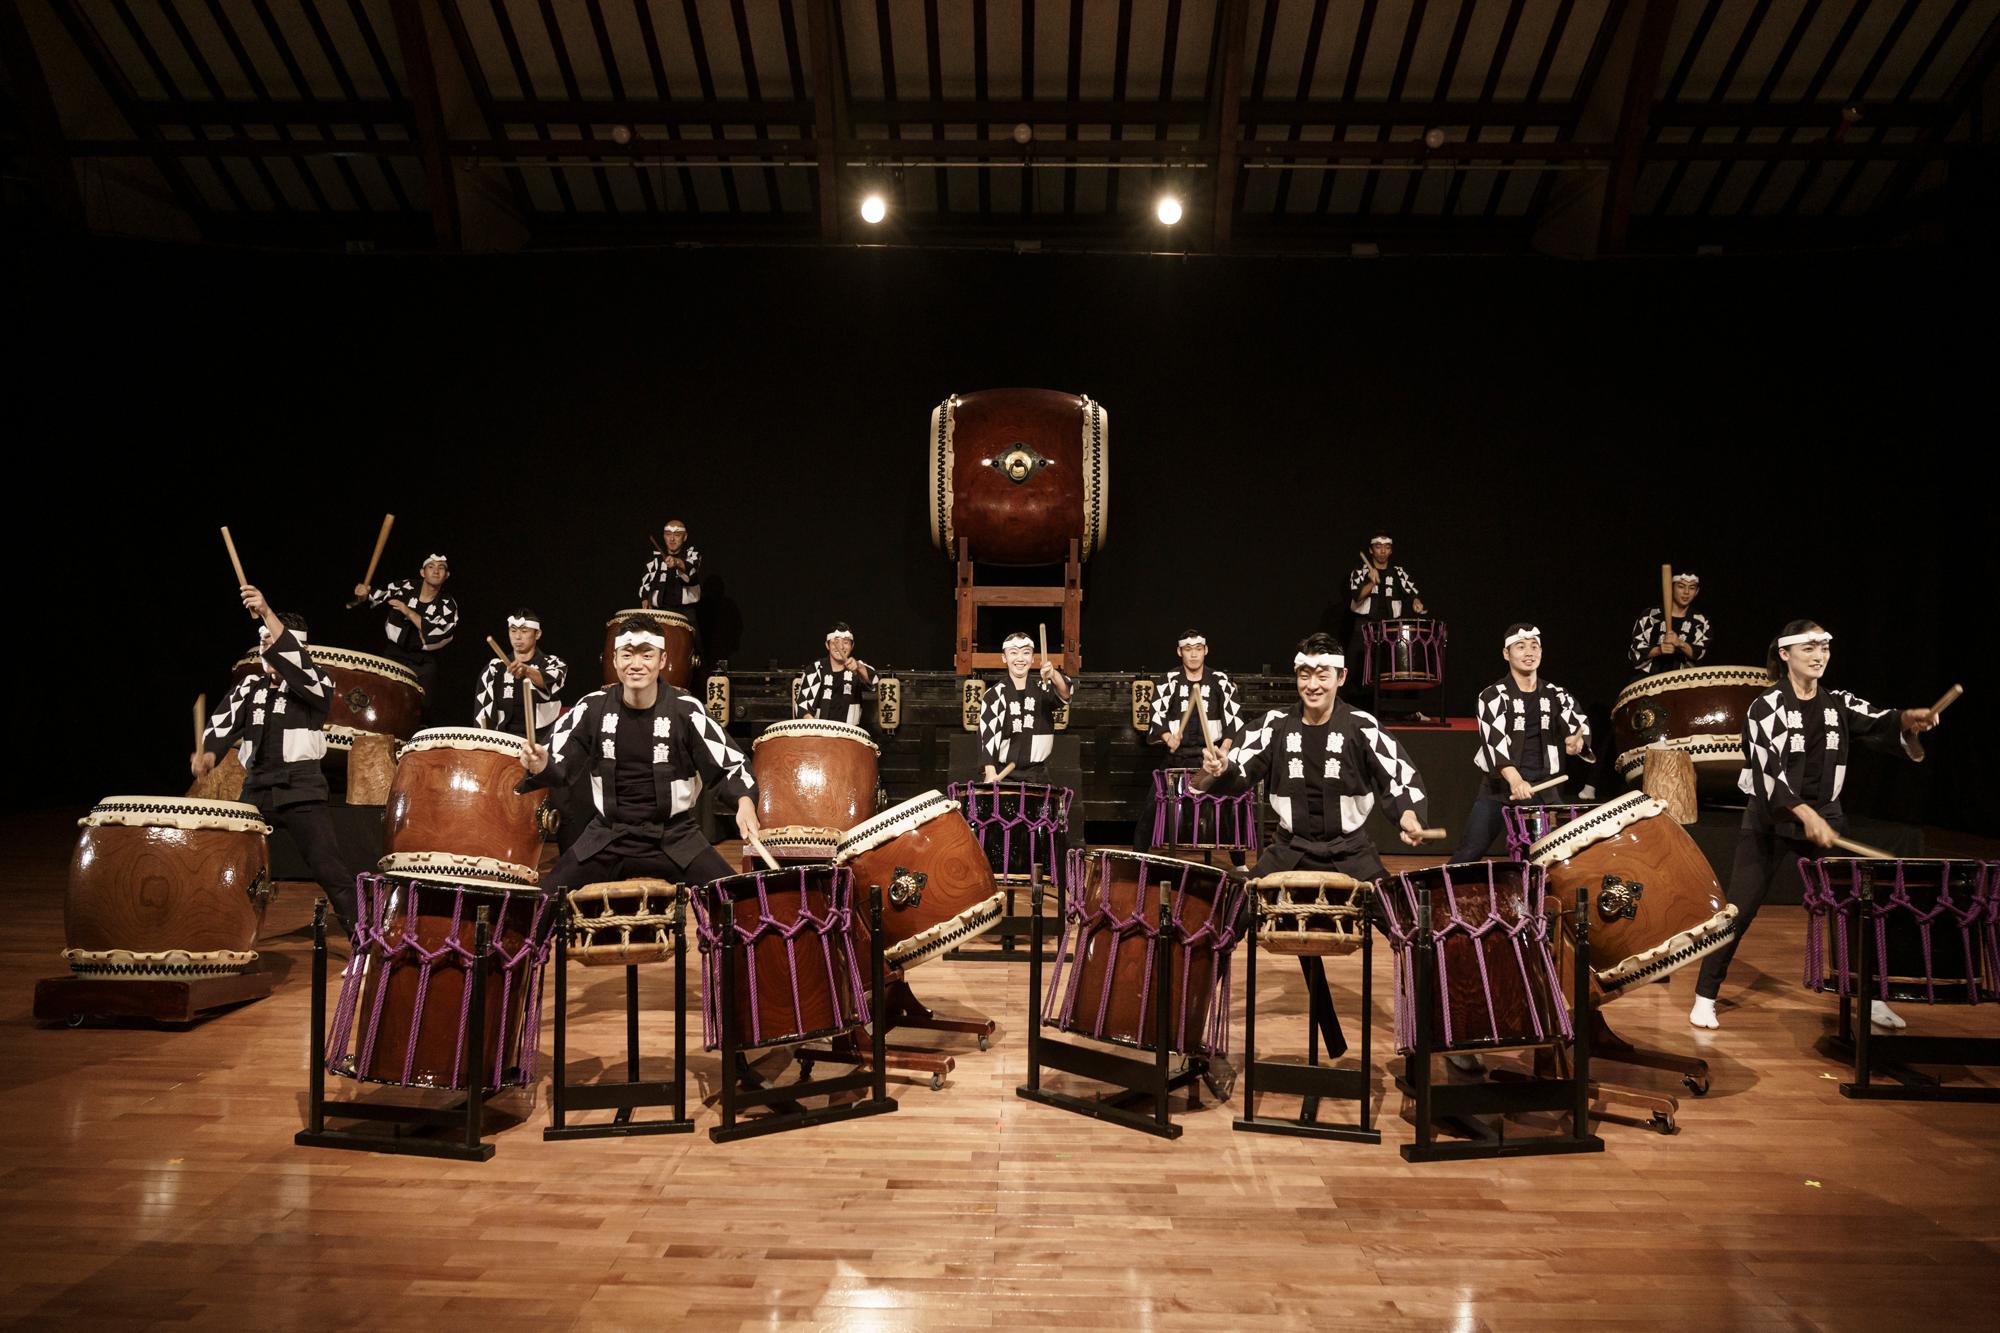 The Leisure and Cultural Services Department has invited Kodo, Japan's taiko drumming ensemble, to Hong Kong to present "Warabe" in September. Photo shows "Warabe" by Kodo. (Source of photo: Takashi Okamoto)